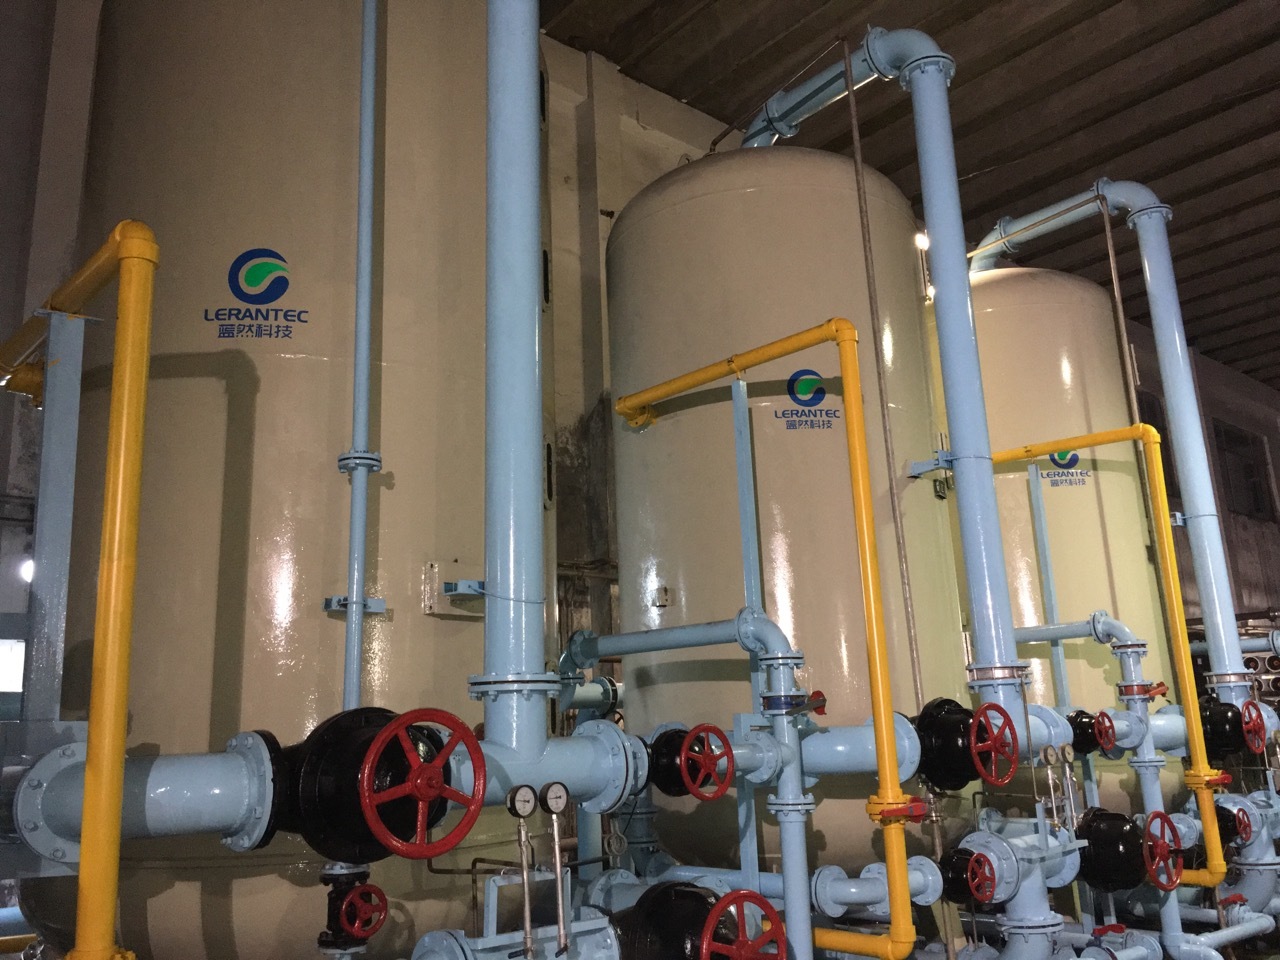 Petrochemical wastewater general contracting